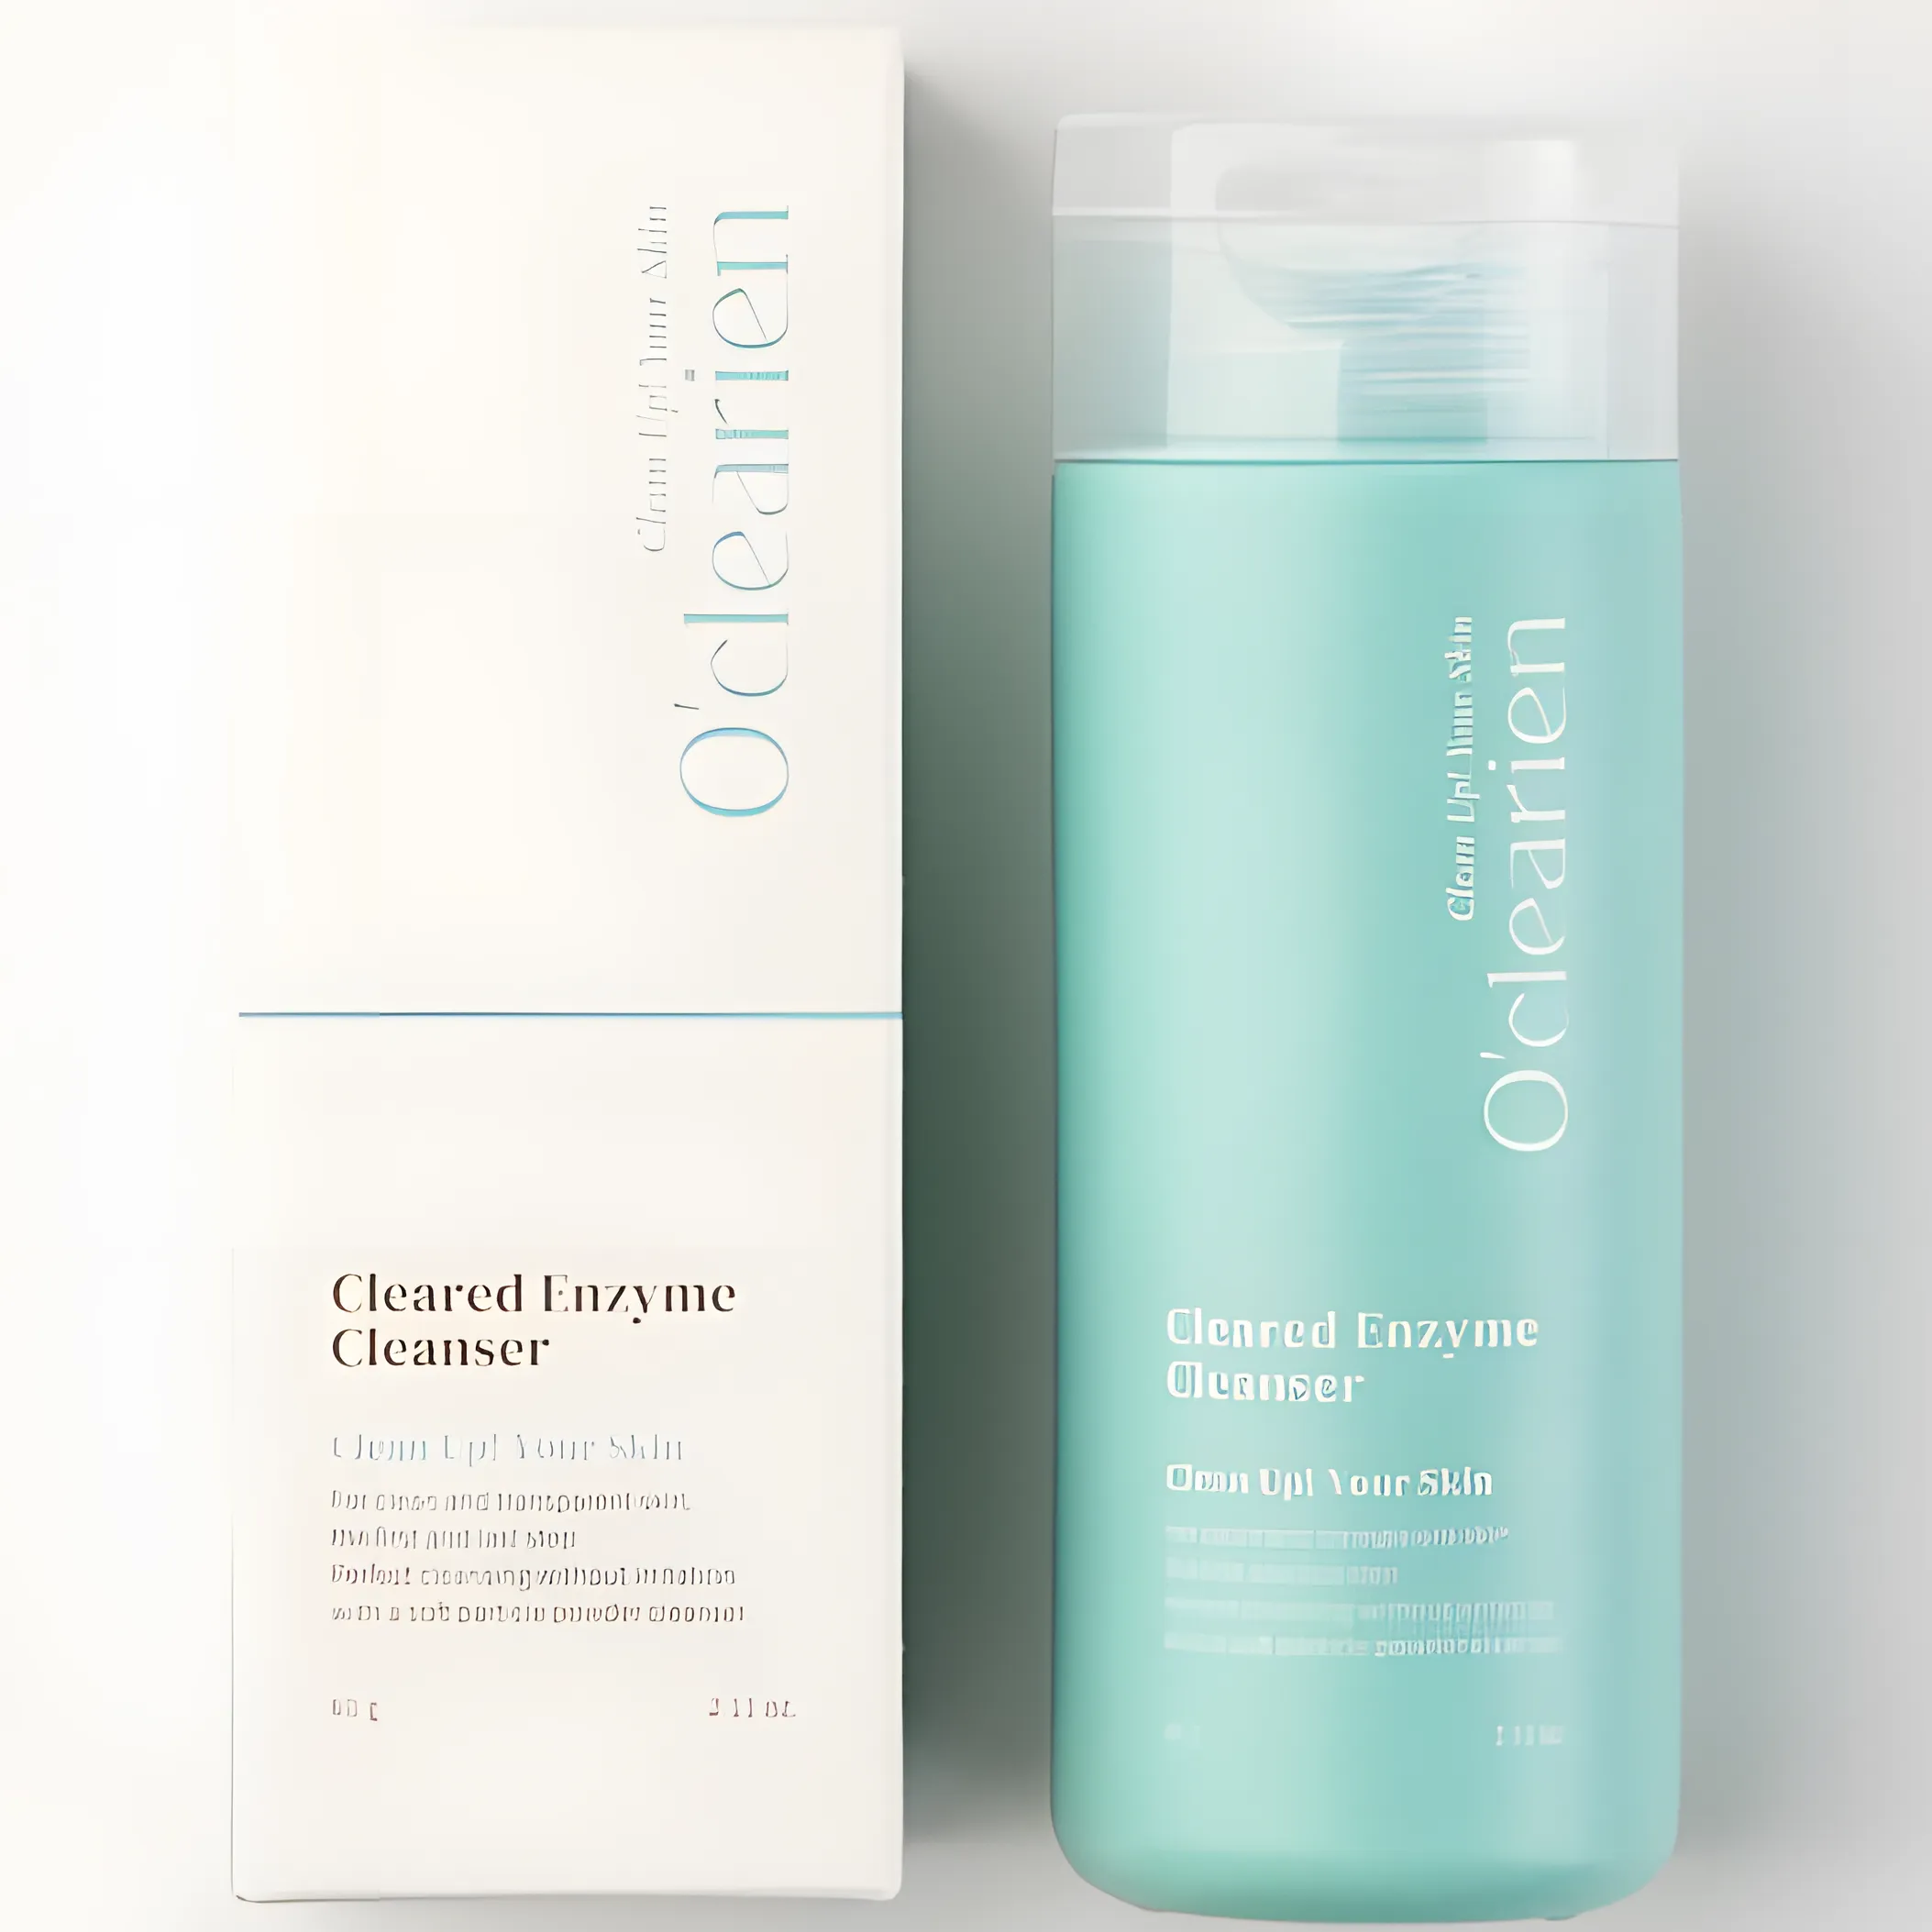 Free Cleared Enzyme Cleanser